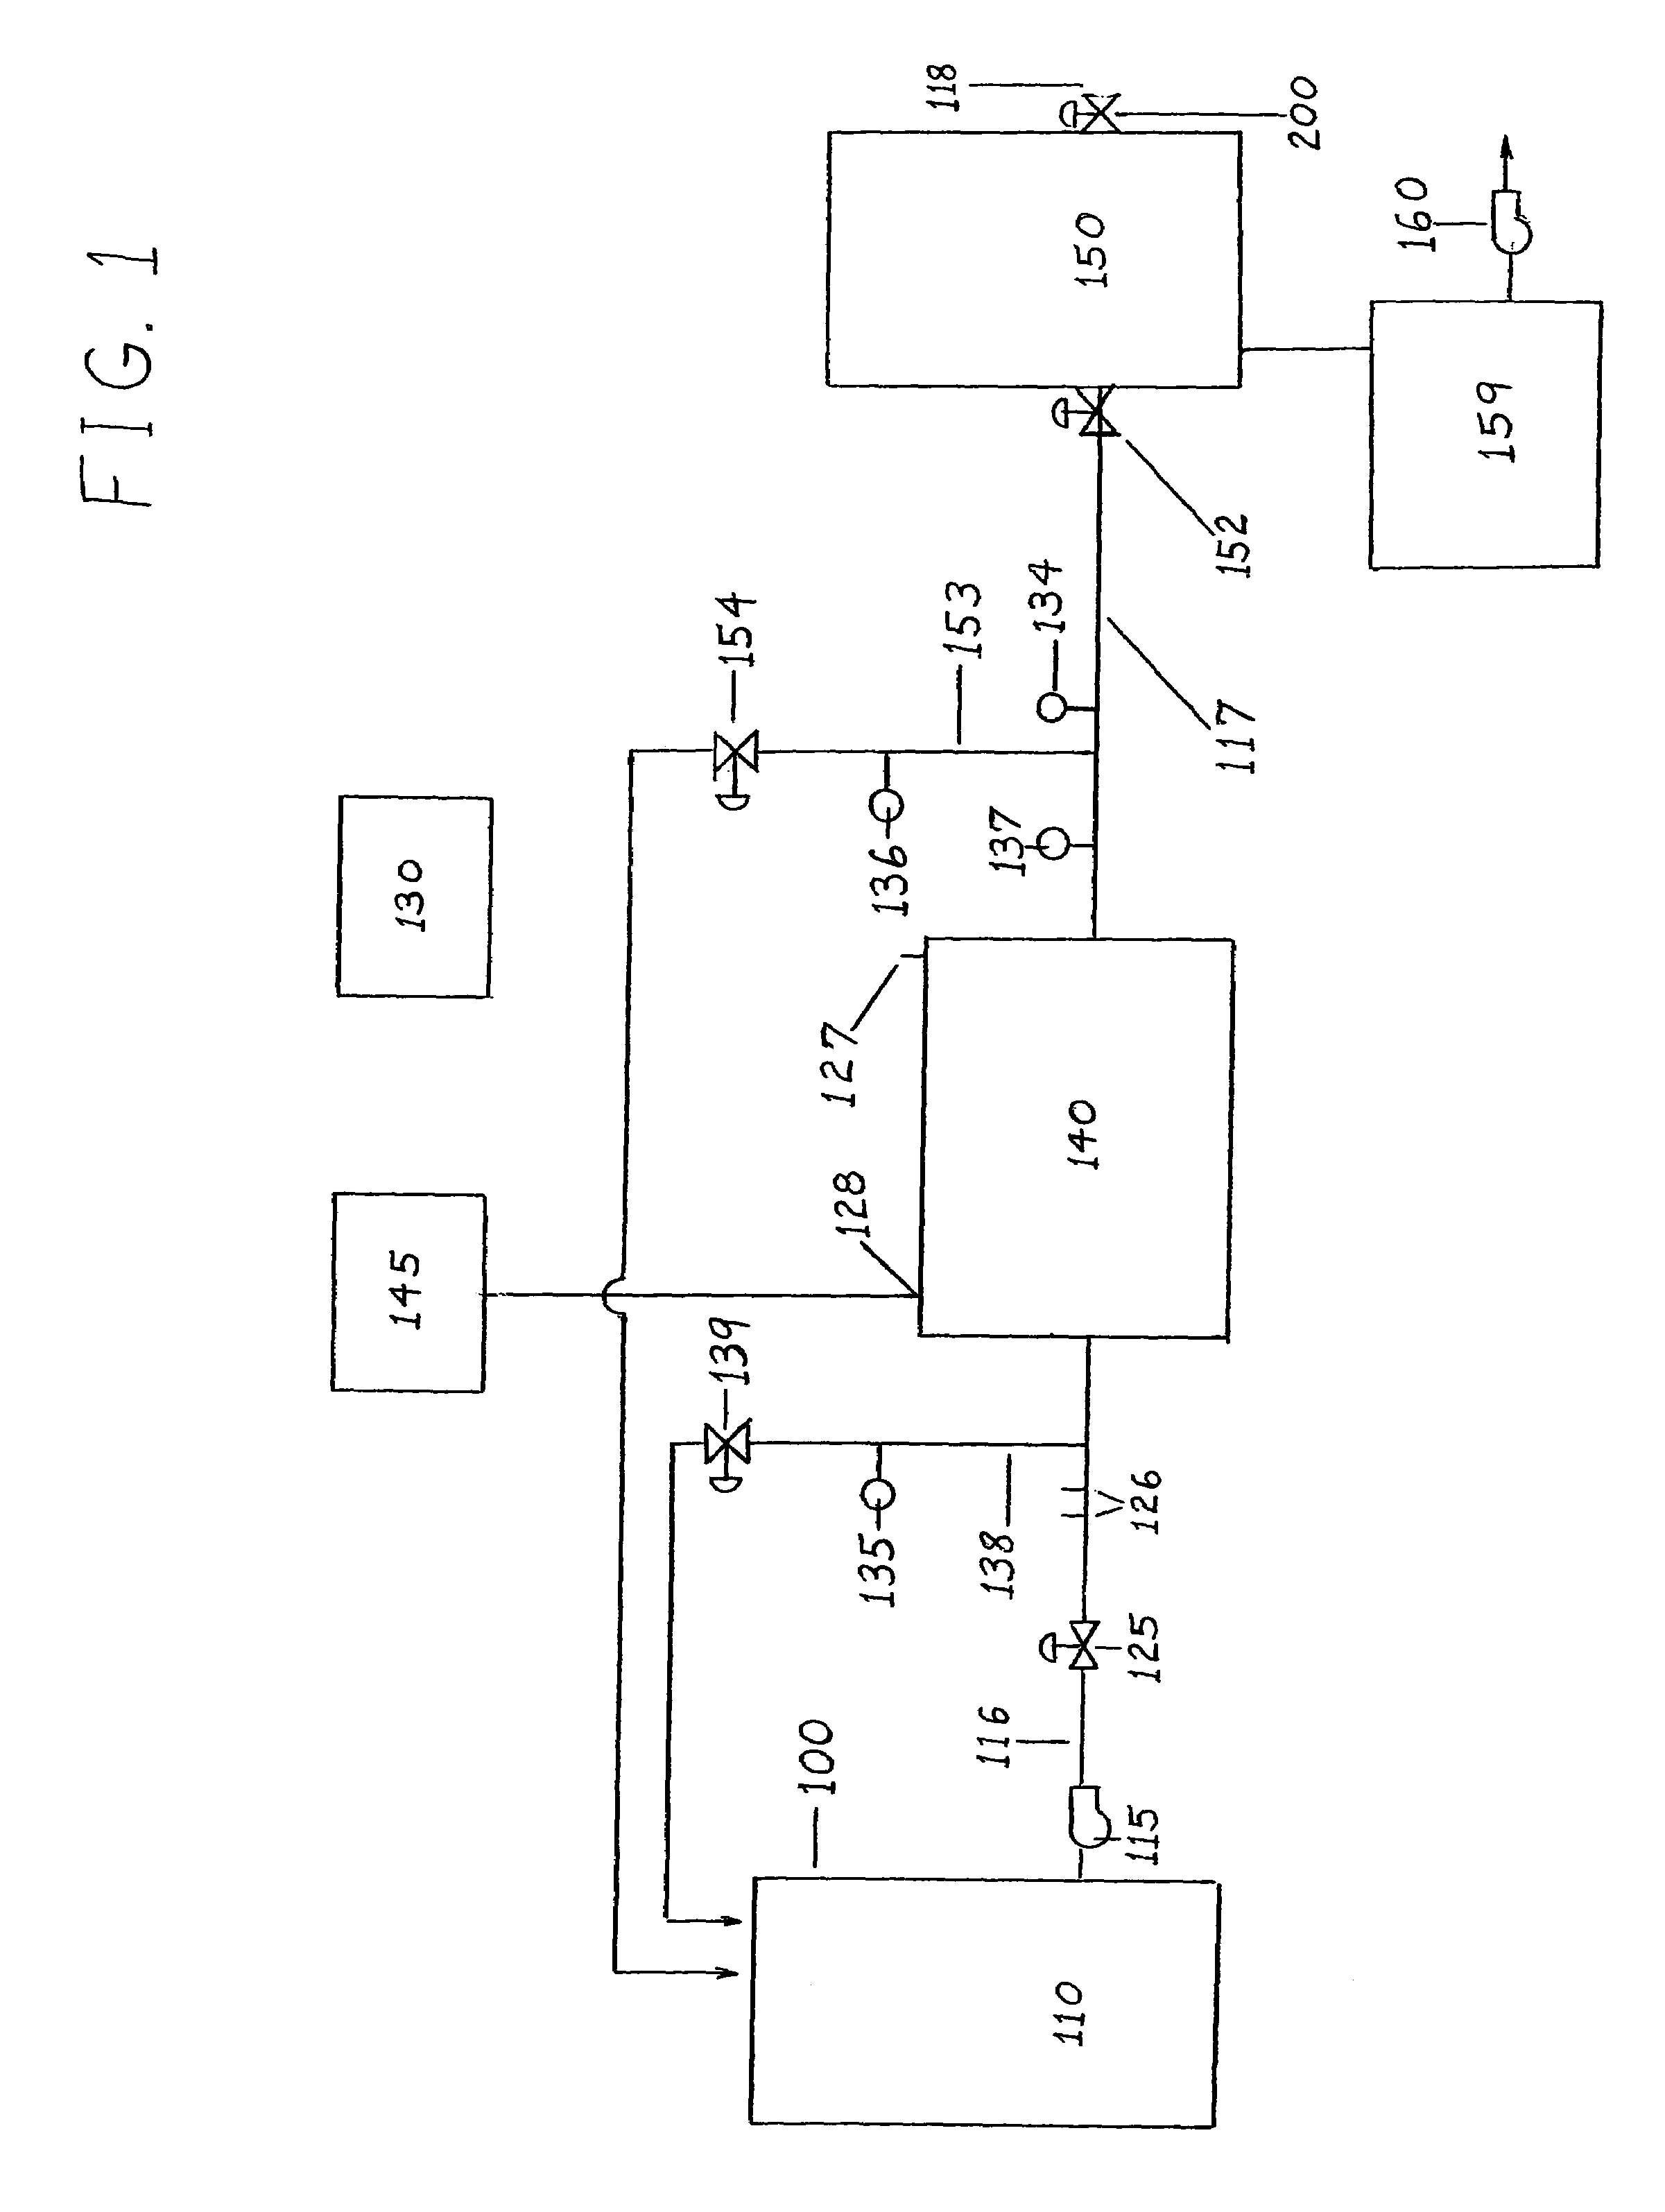 High pressure process and apparatus for the electrocoagulative treatment of aqueous and viscous fluids